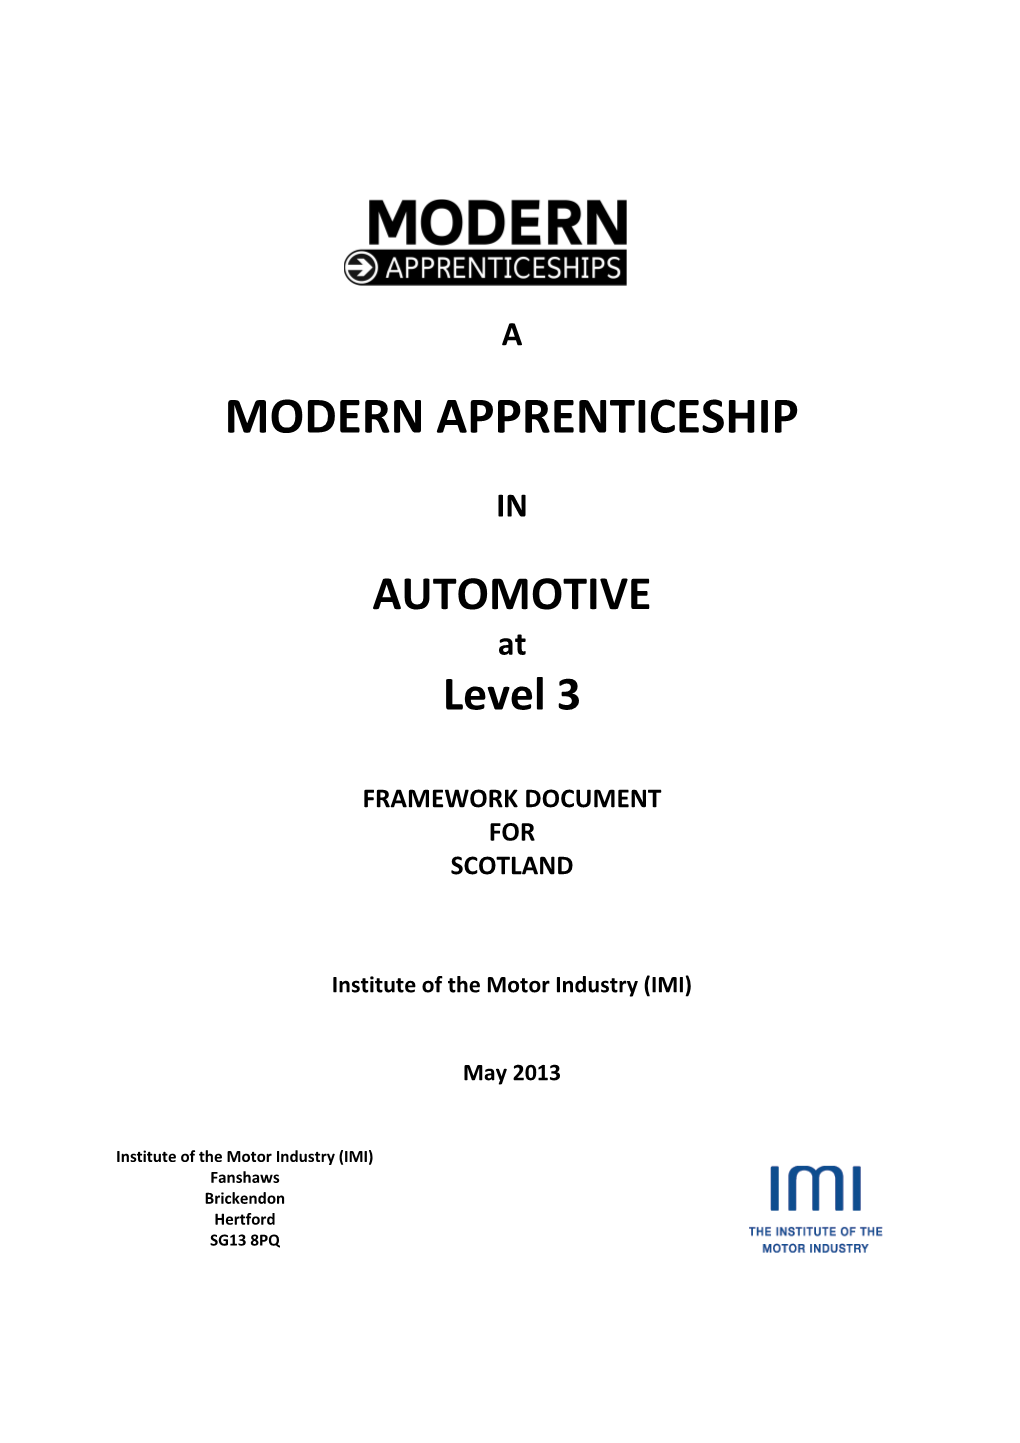 What Are Modern Apprenticeships?